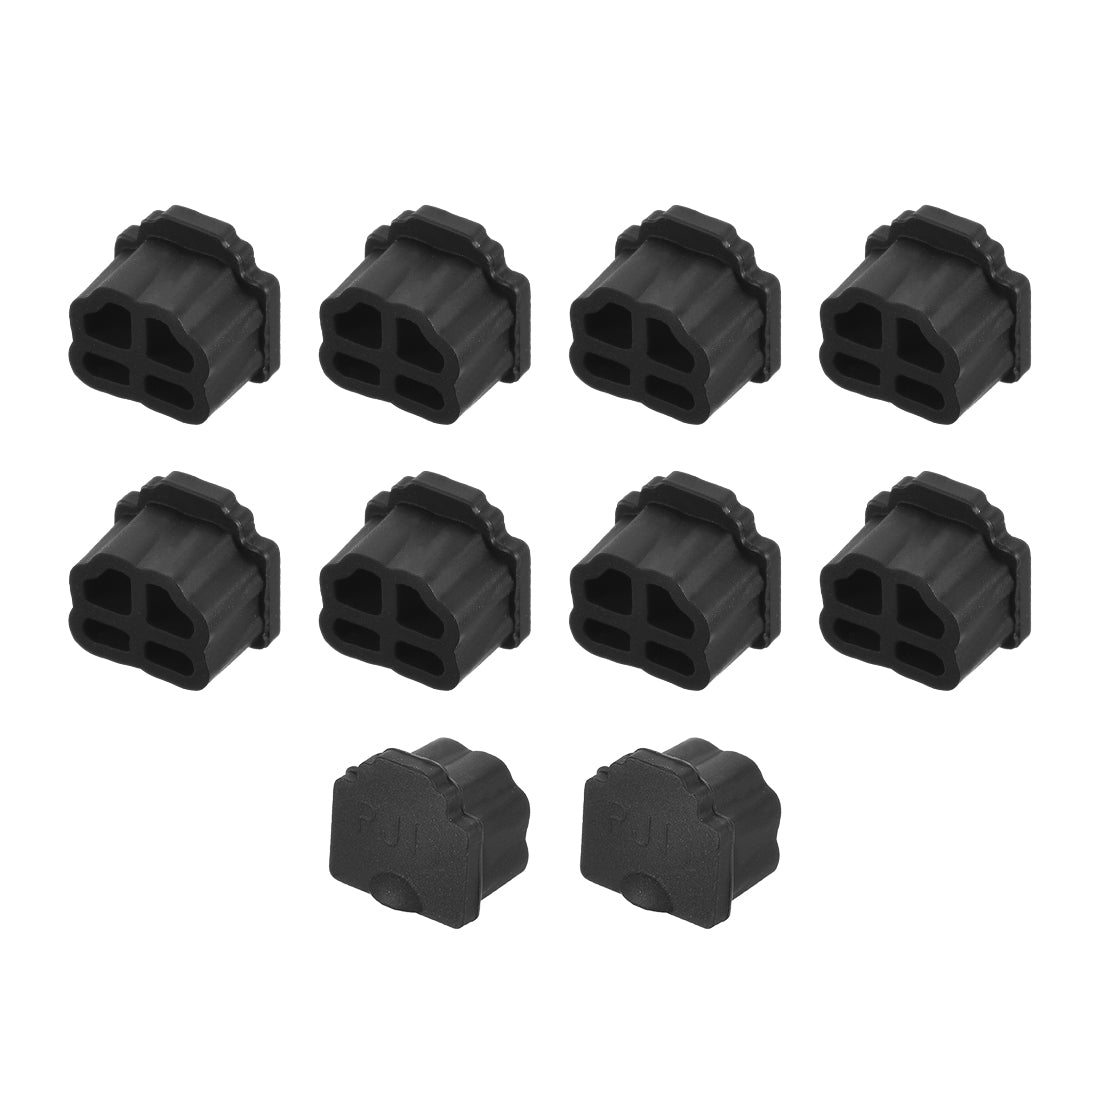 uxcell Uxcell Silicone Telephone Modular Port RJ11 Anti-Dust Stopper Cap Cover Black 10pcs